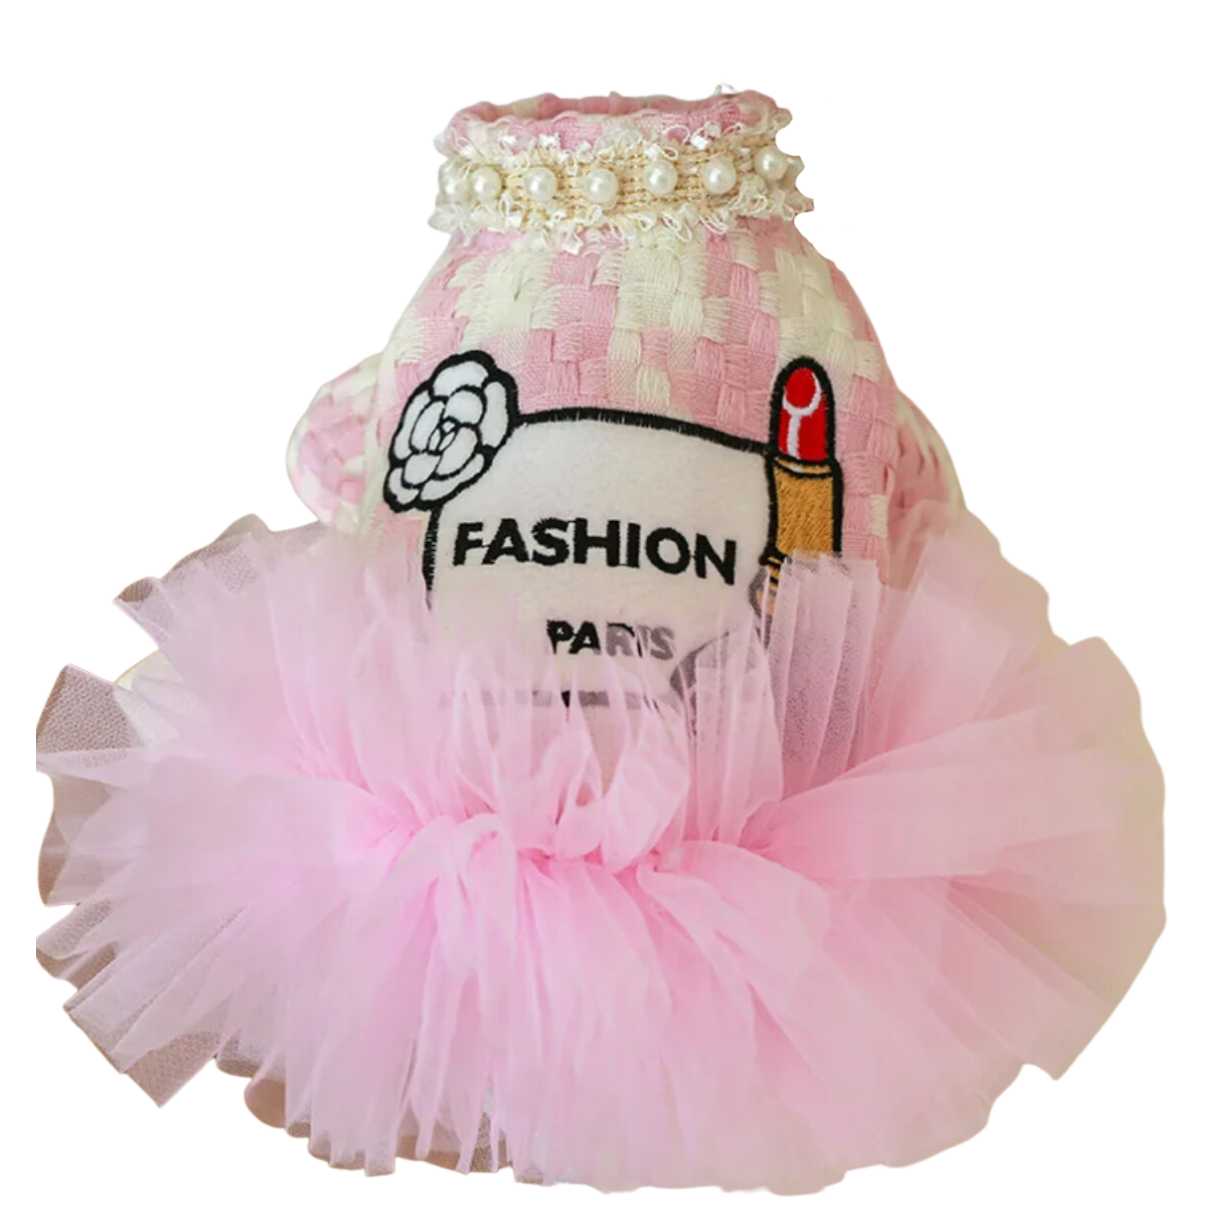 Pink fashion paris dog dress with a pearl style around the neck.